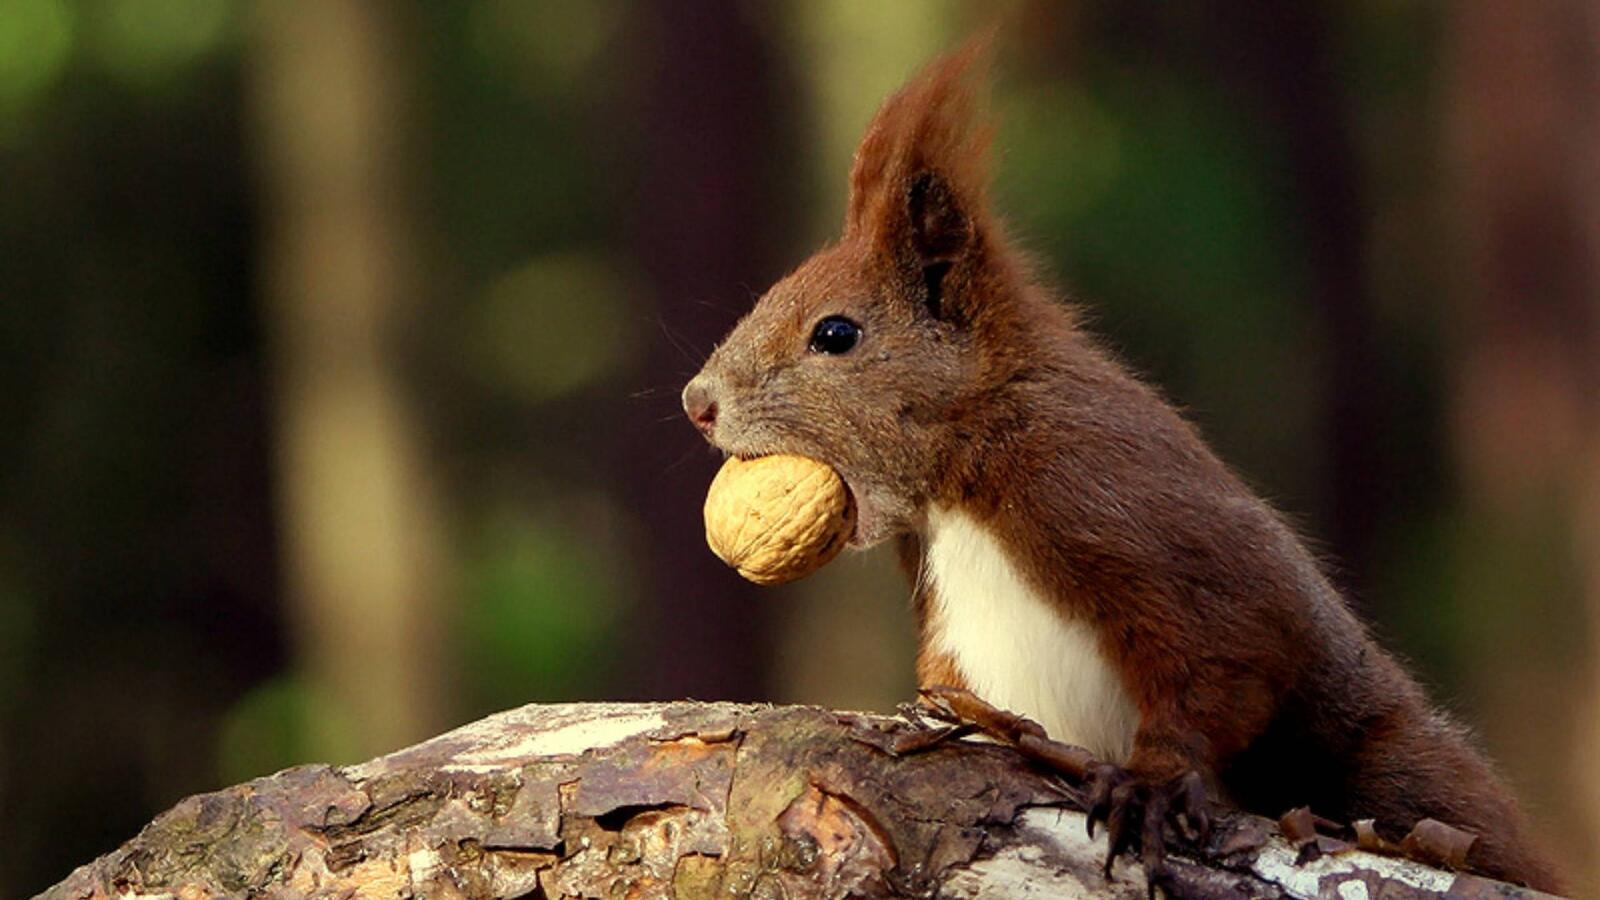 Wallpapers the squirrel and the nut in his mouth nut stone on the desktop